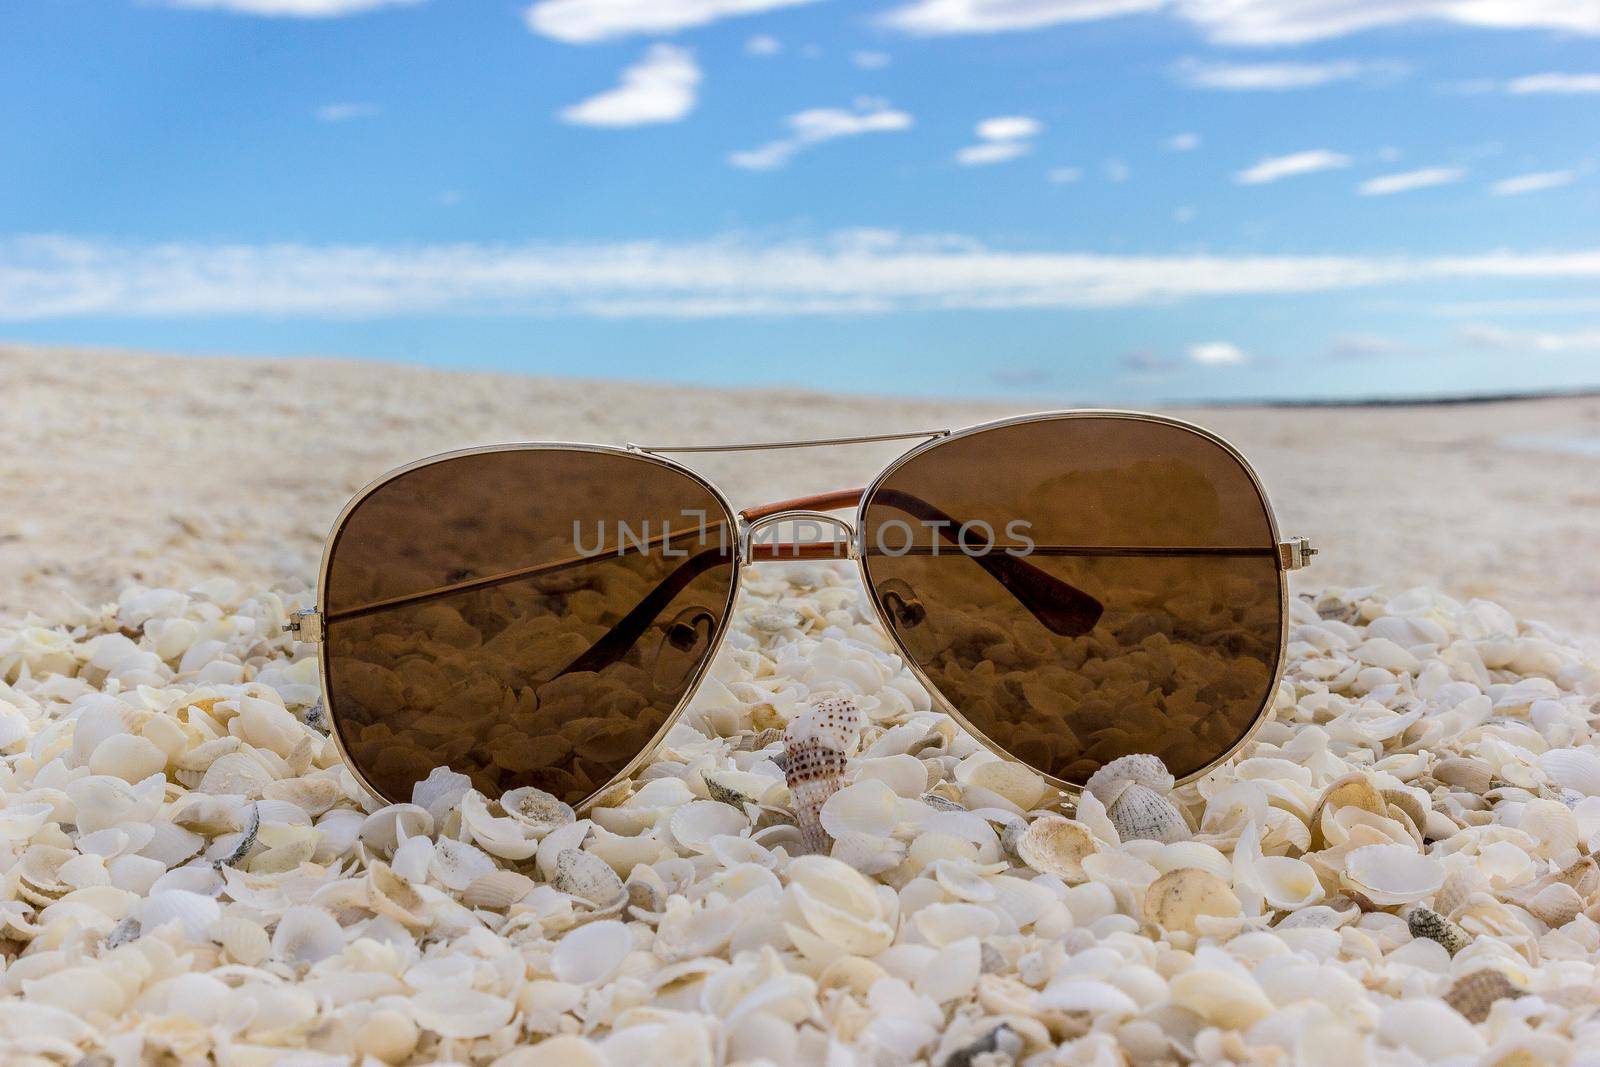 Sunglasses at the Shellbeach in SharkBay, Western Australia by bettercallcurry